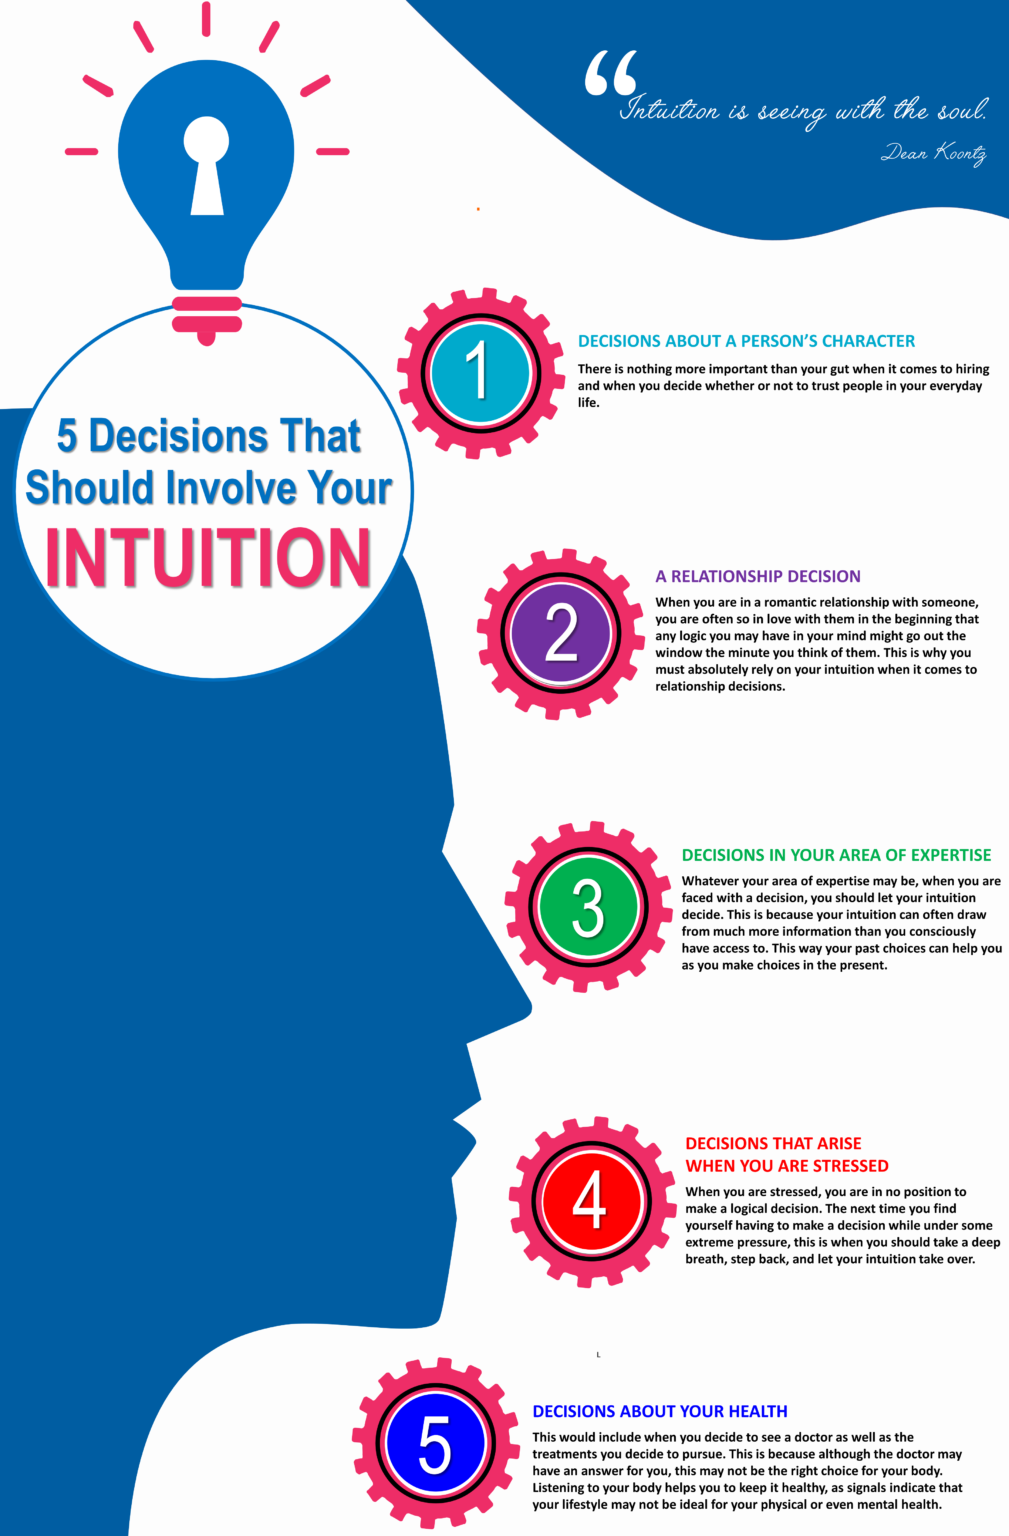 research on intuition